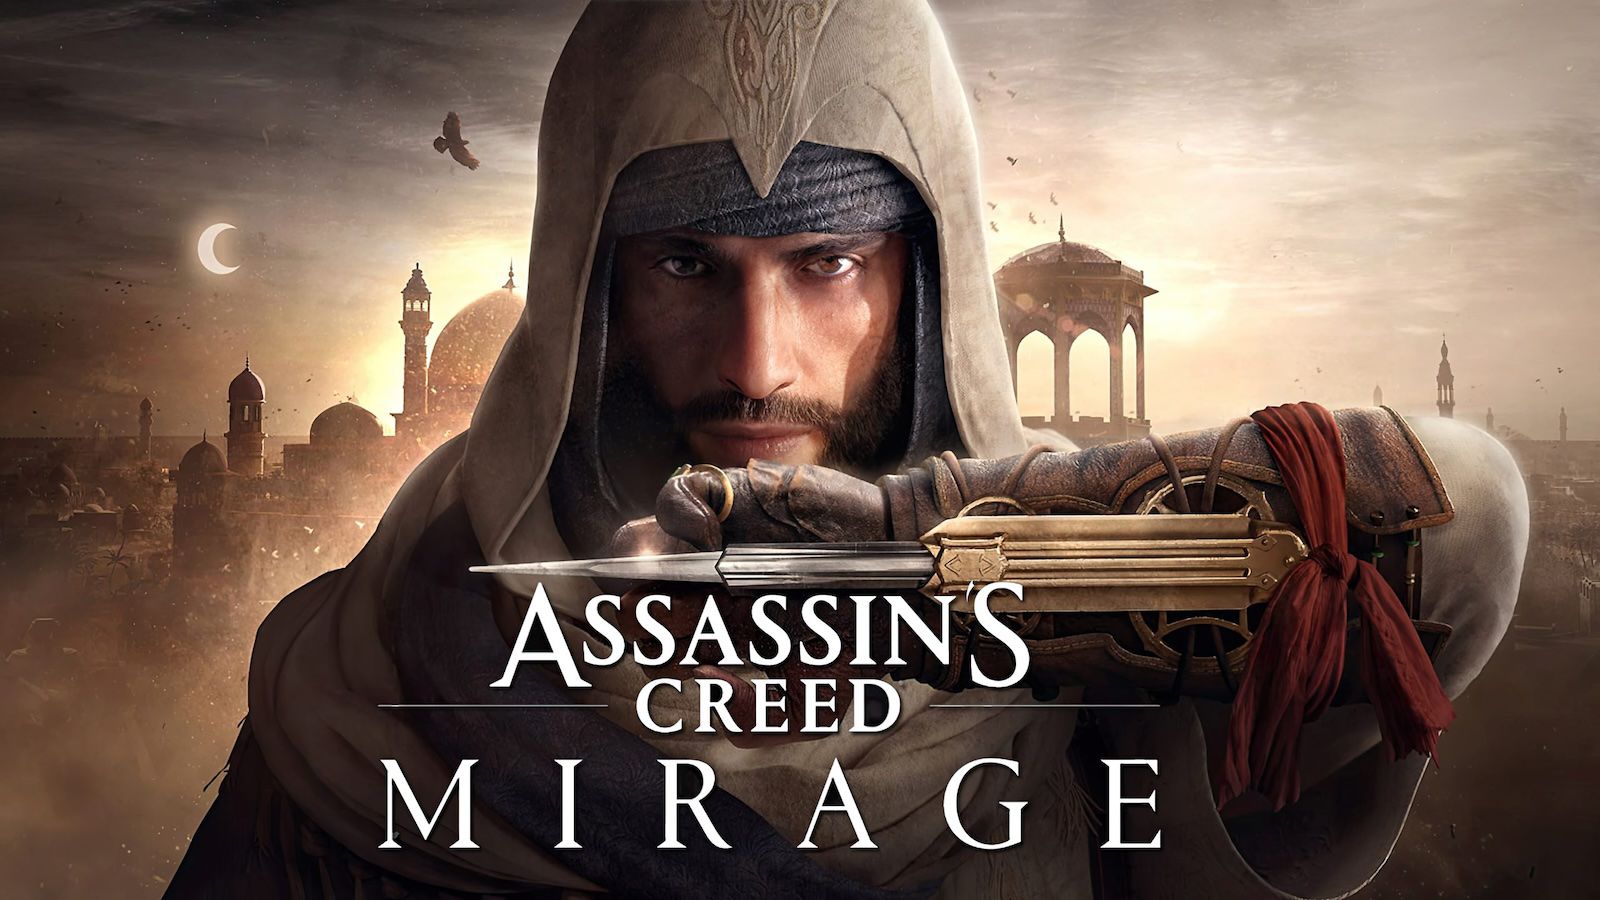 Ubisoft today announced that Assassin's Creed Mirage will be available in the App Store starting June 6 for the iPhone 15 Pro and iPhone 15 Pro Max, a